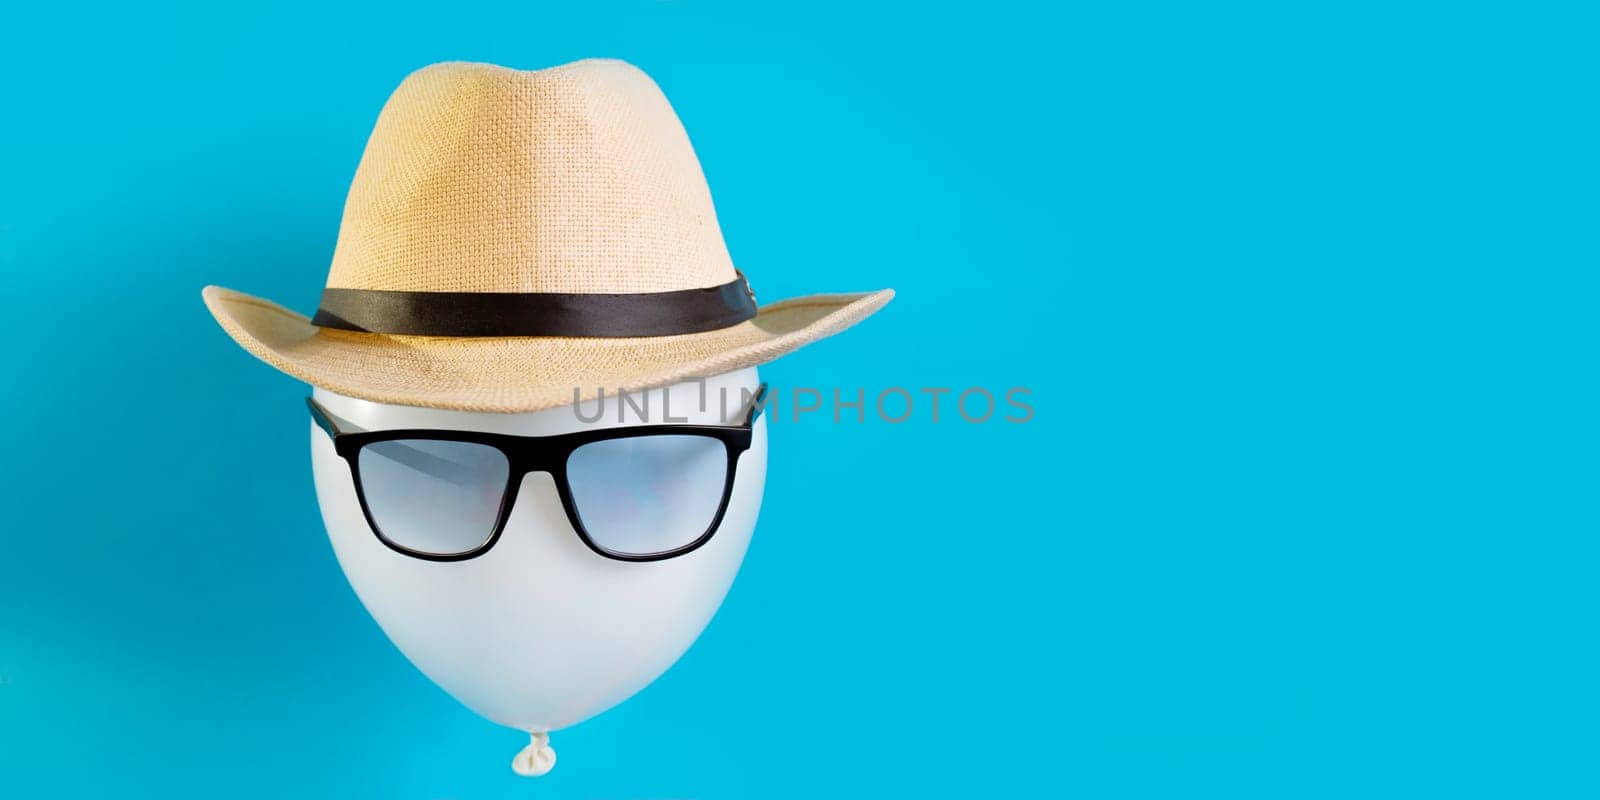 Balloon tourist close-up. The image of a male traveler in a hat and sunglasses concept tourist destination by malyshph